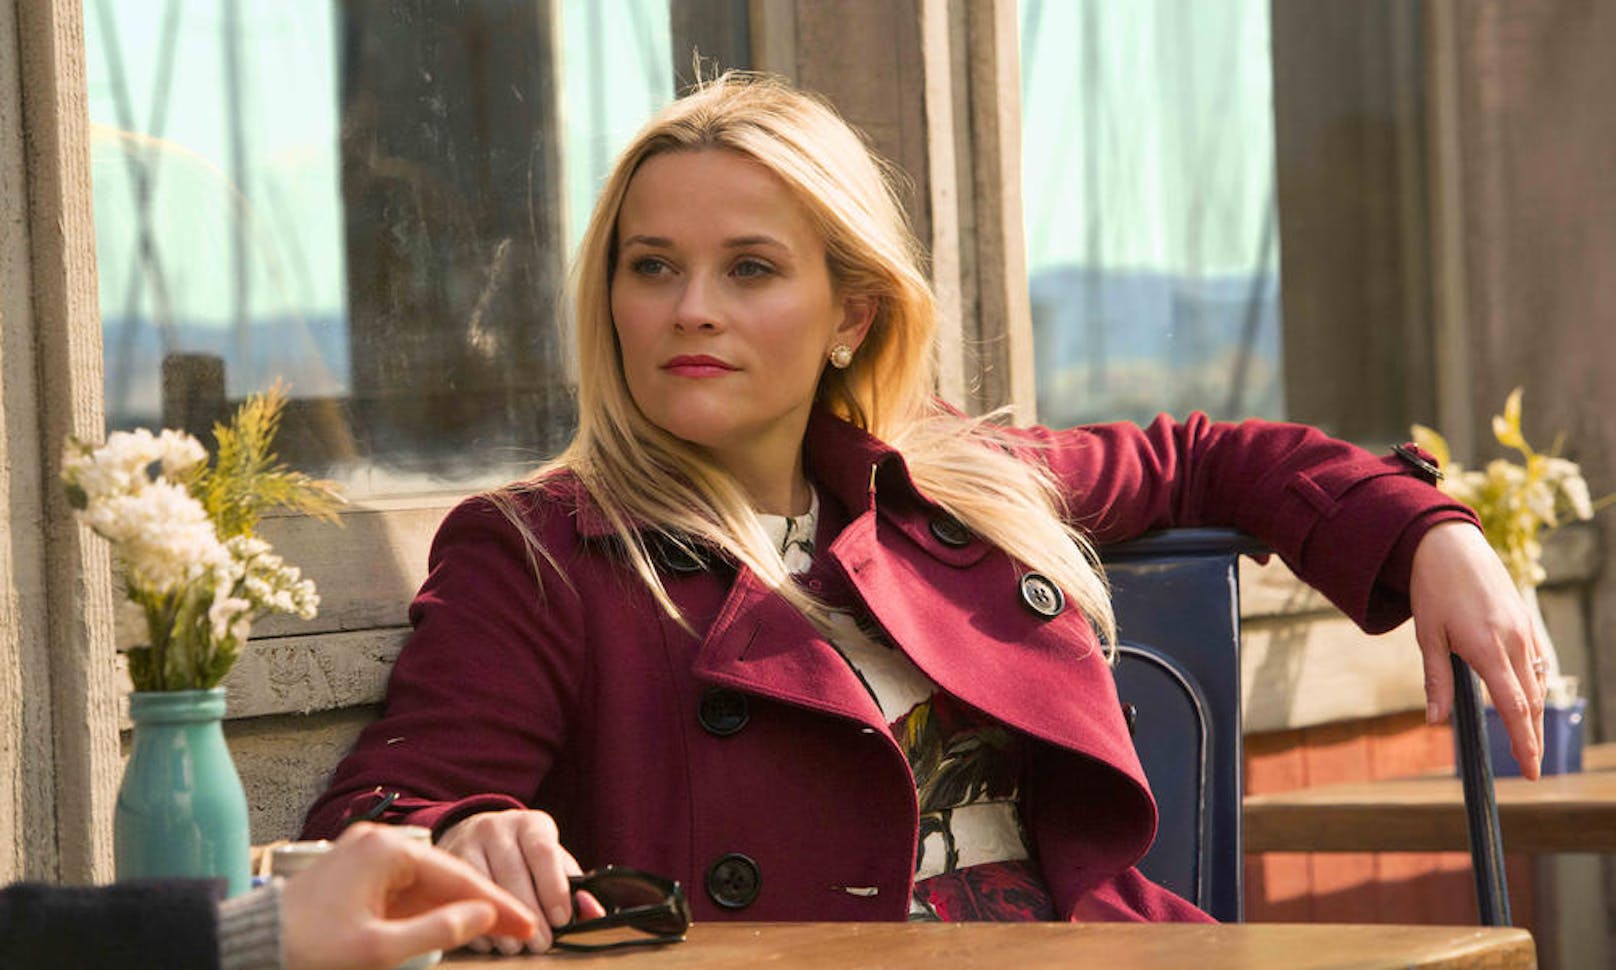 Reese Witherspoon in "Little Big Lies"